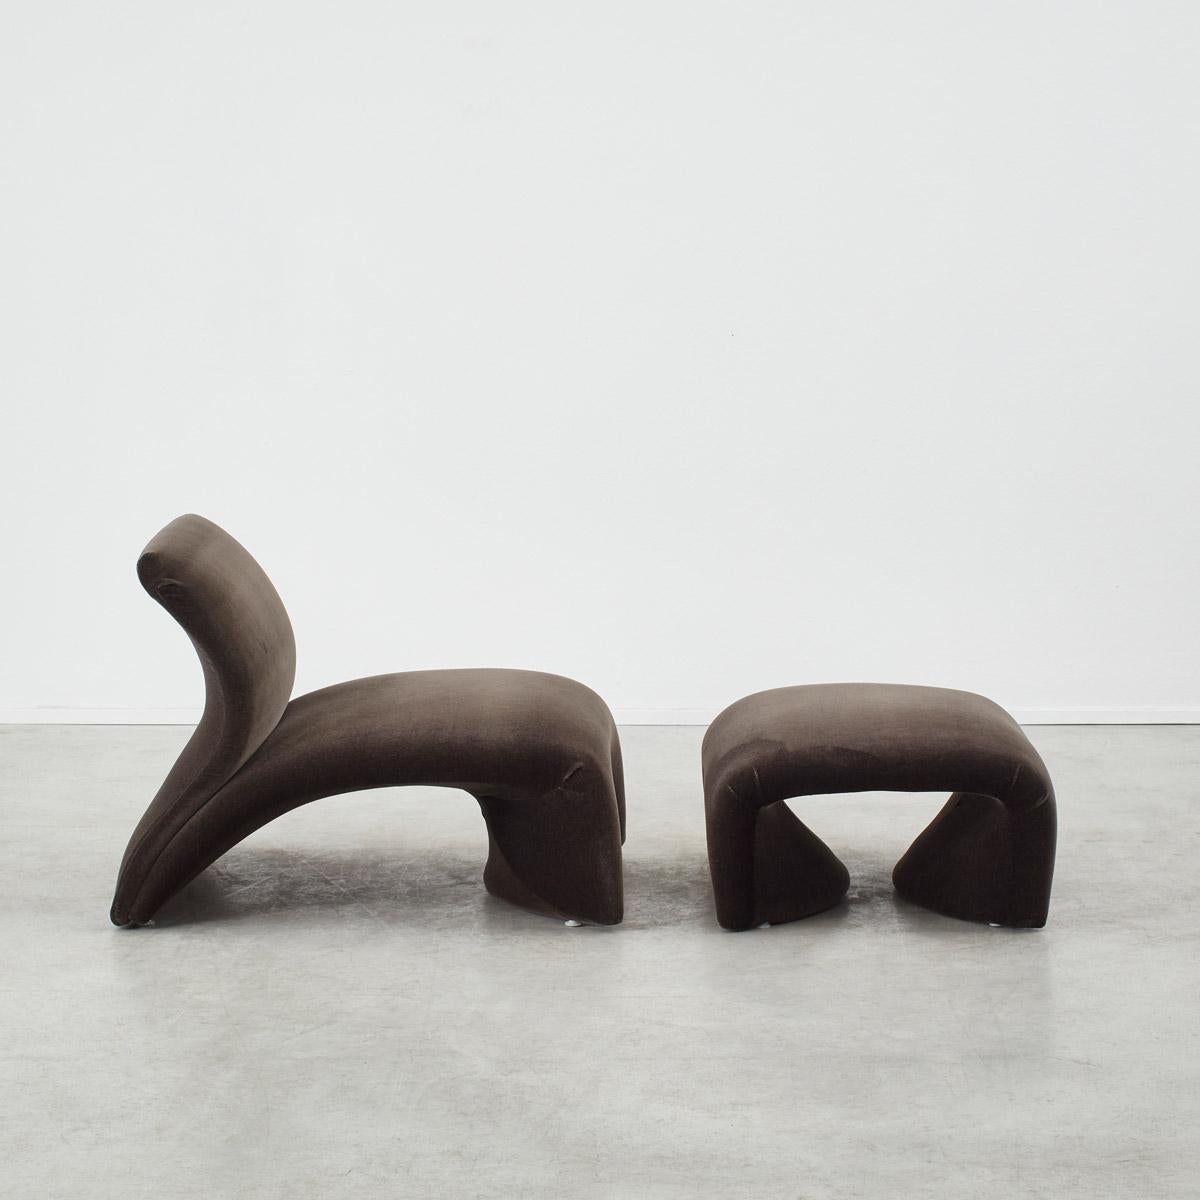 French Kwok Hoï Chan Kaïdo chair and ottoman for Steiner, France 1968